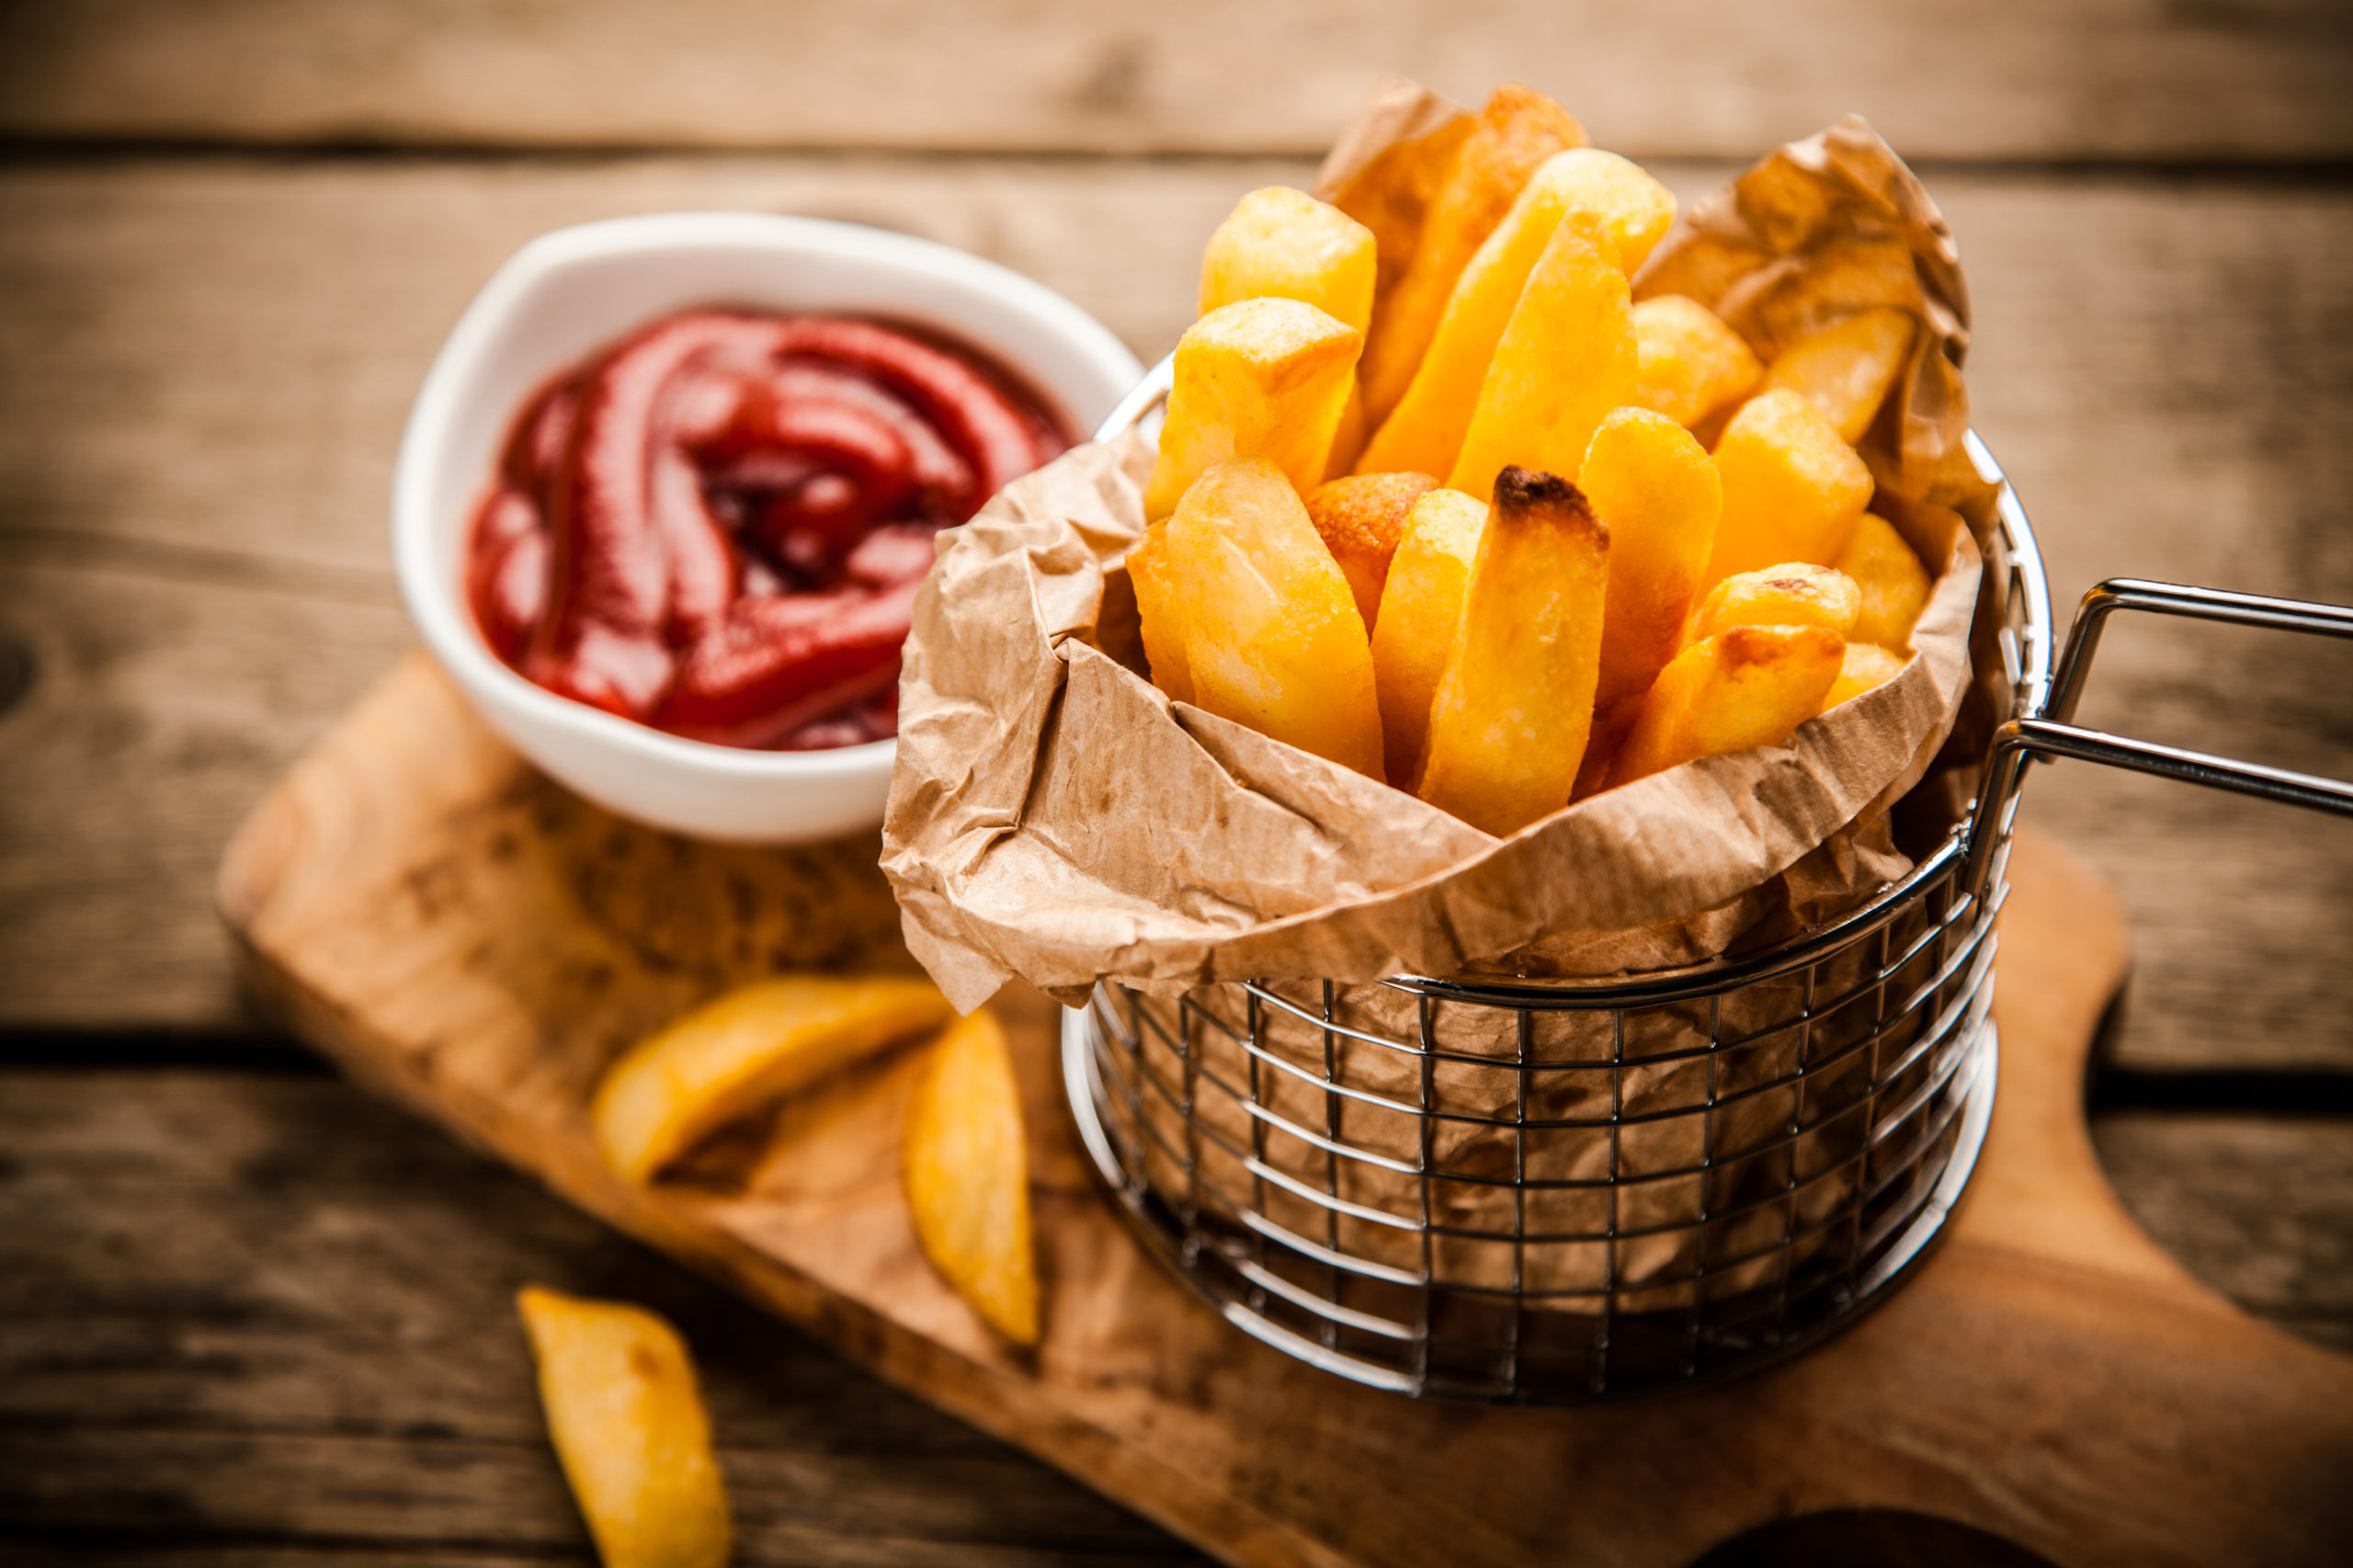 National Fry Day 10 places you can get FREE or discounted fries today